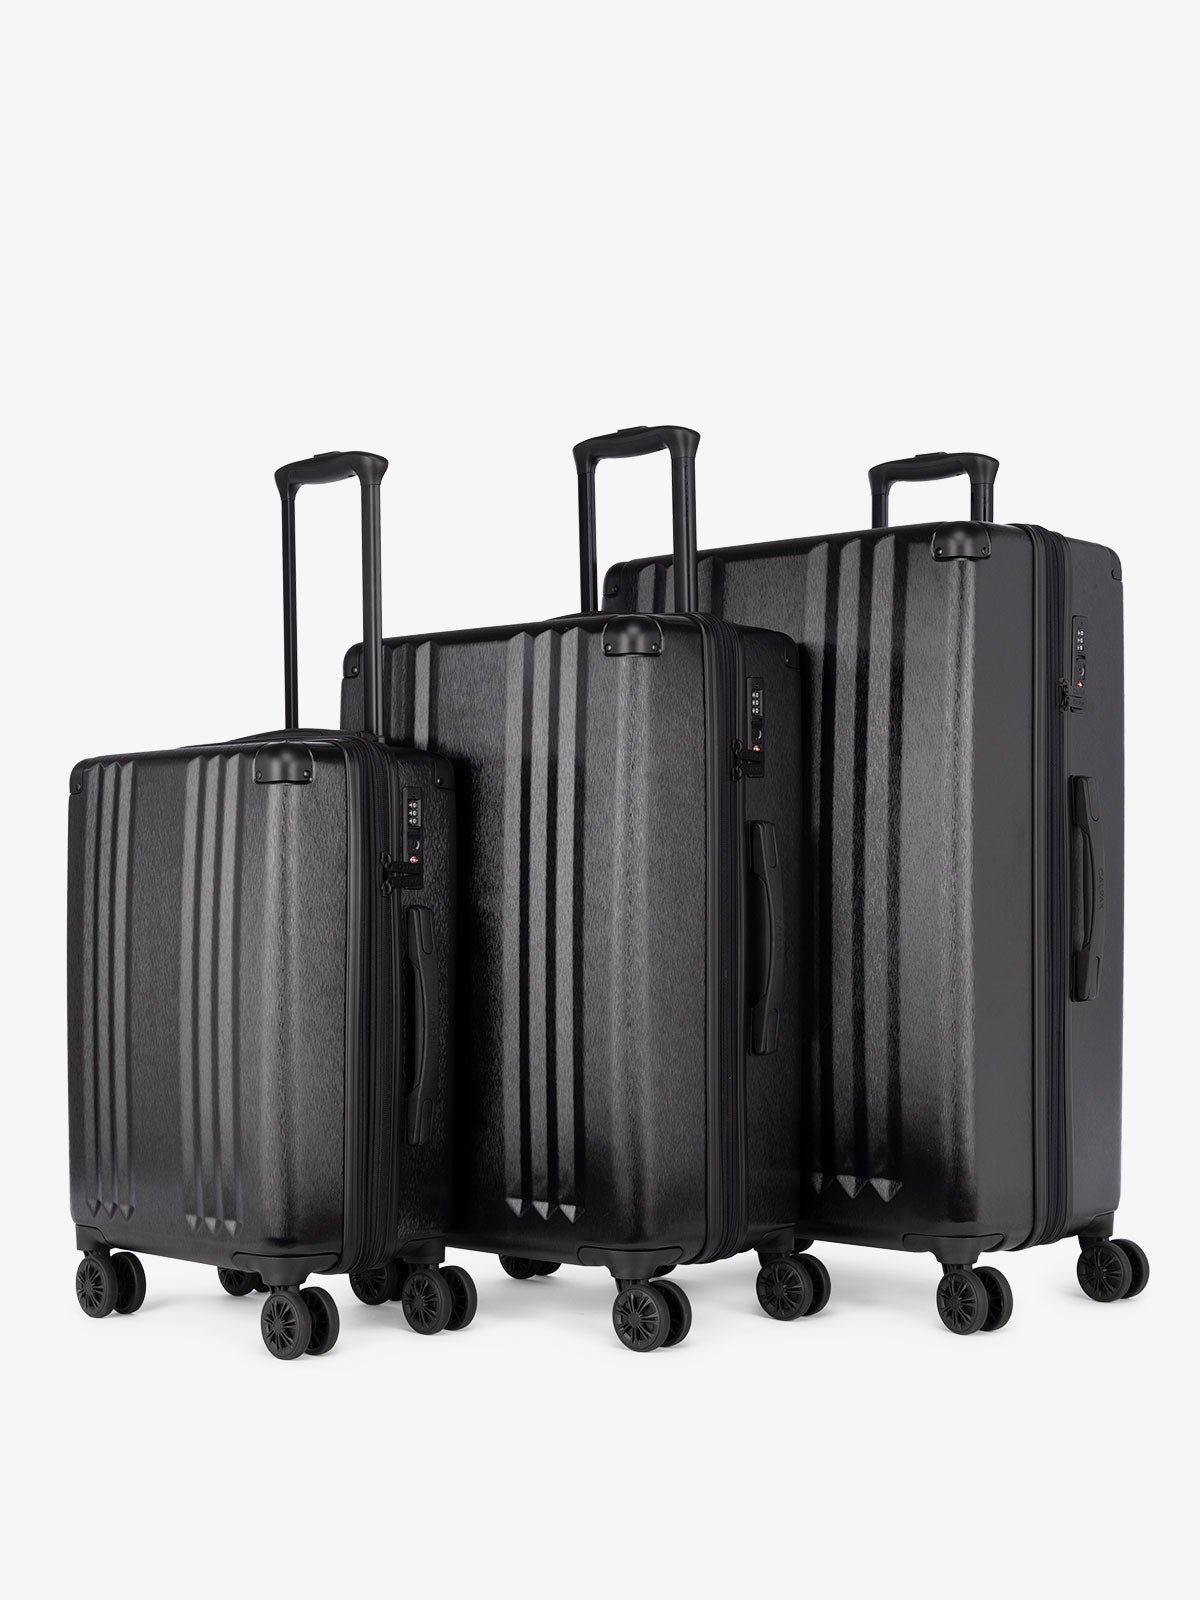 CALPAK Ambeur: 3 piece lightweight durable black hard shell luggage set with carry on